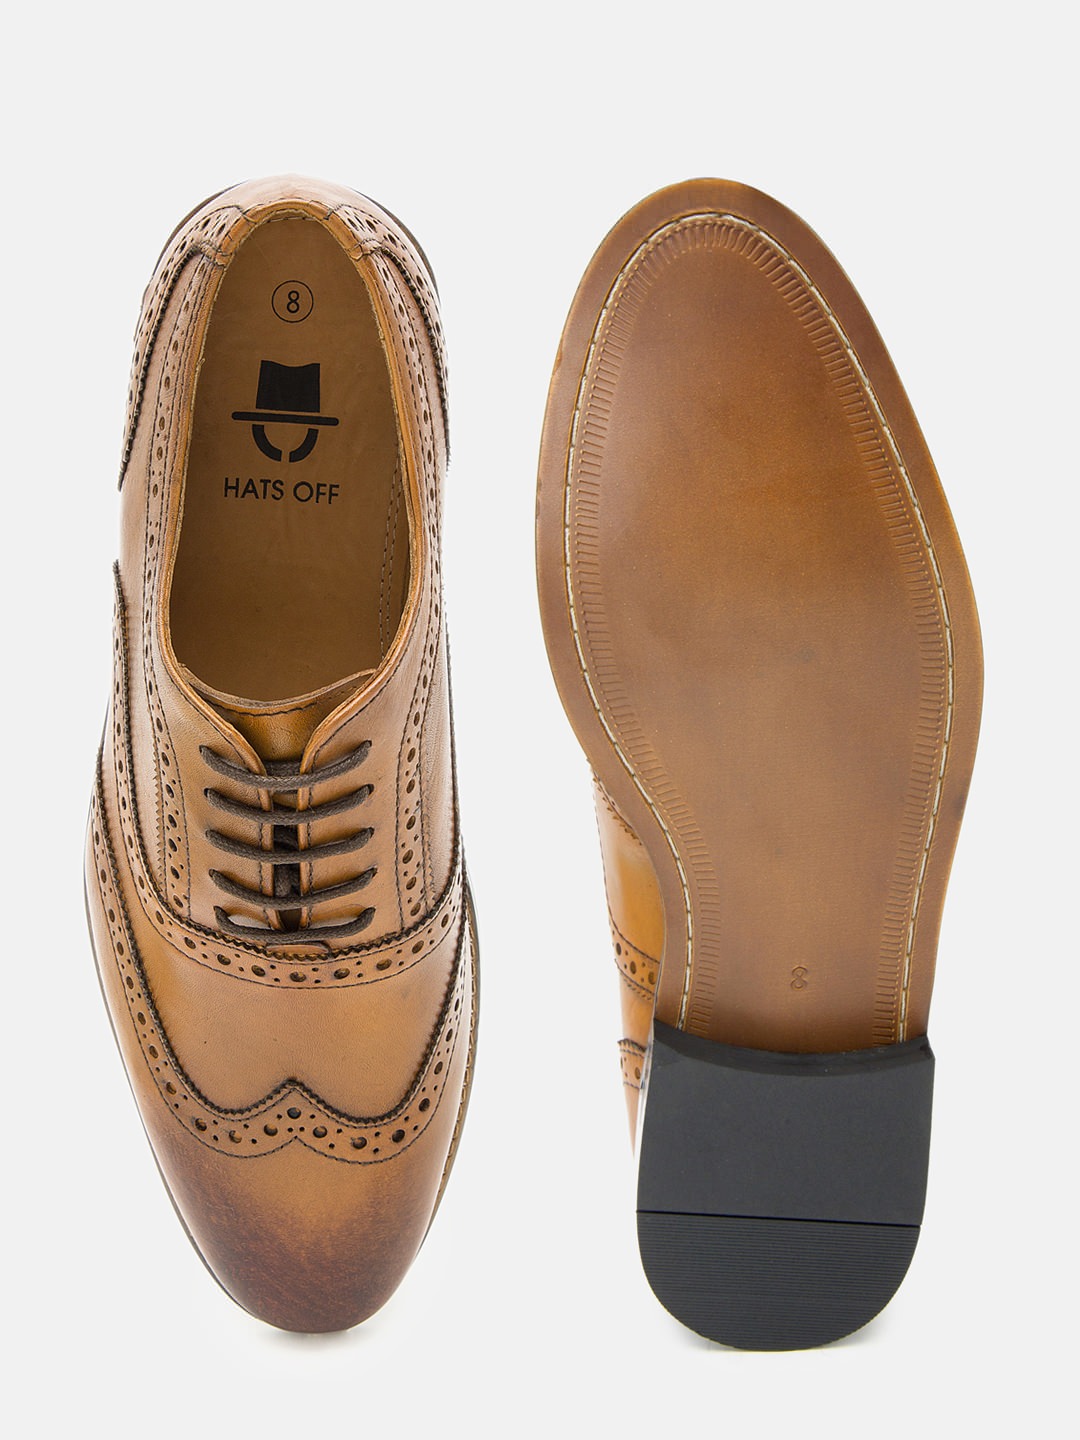 Best Genuine Leather Tan Brogues Shoes For Mens